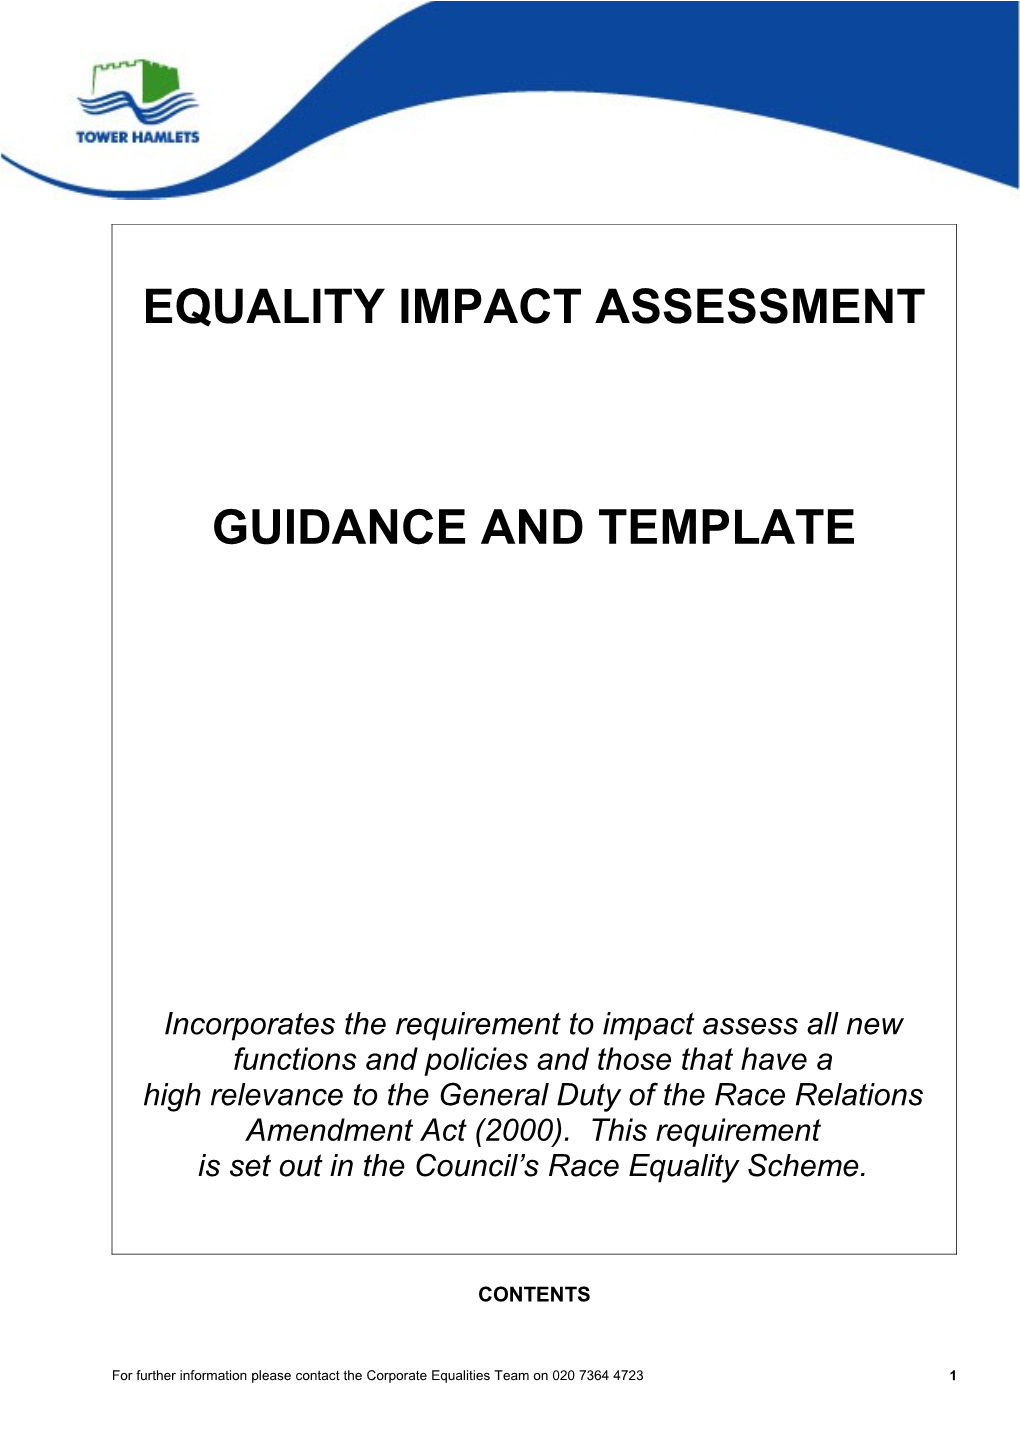 Equality Impact Assessment Guidance and Template (Word 198KB) s1